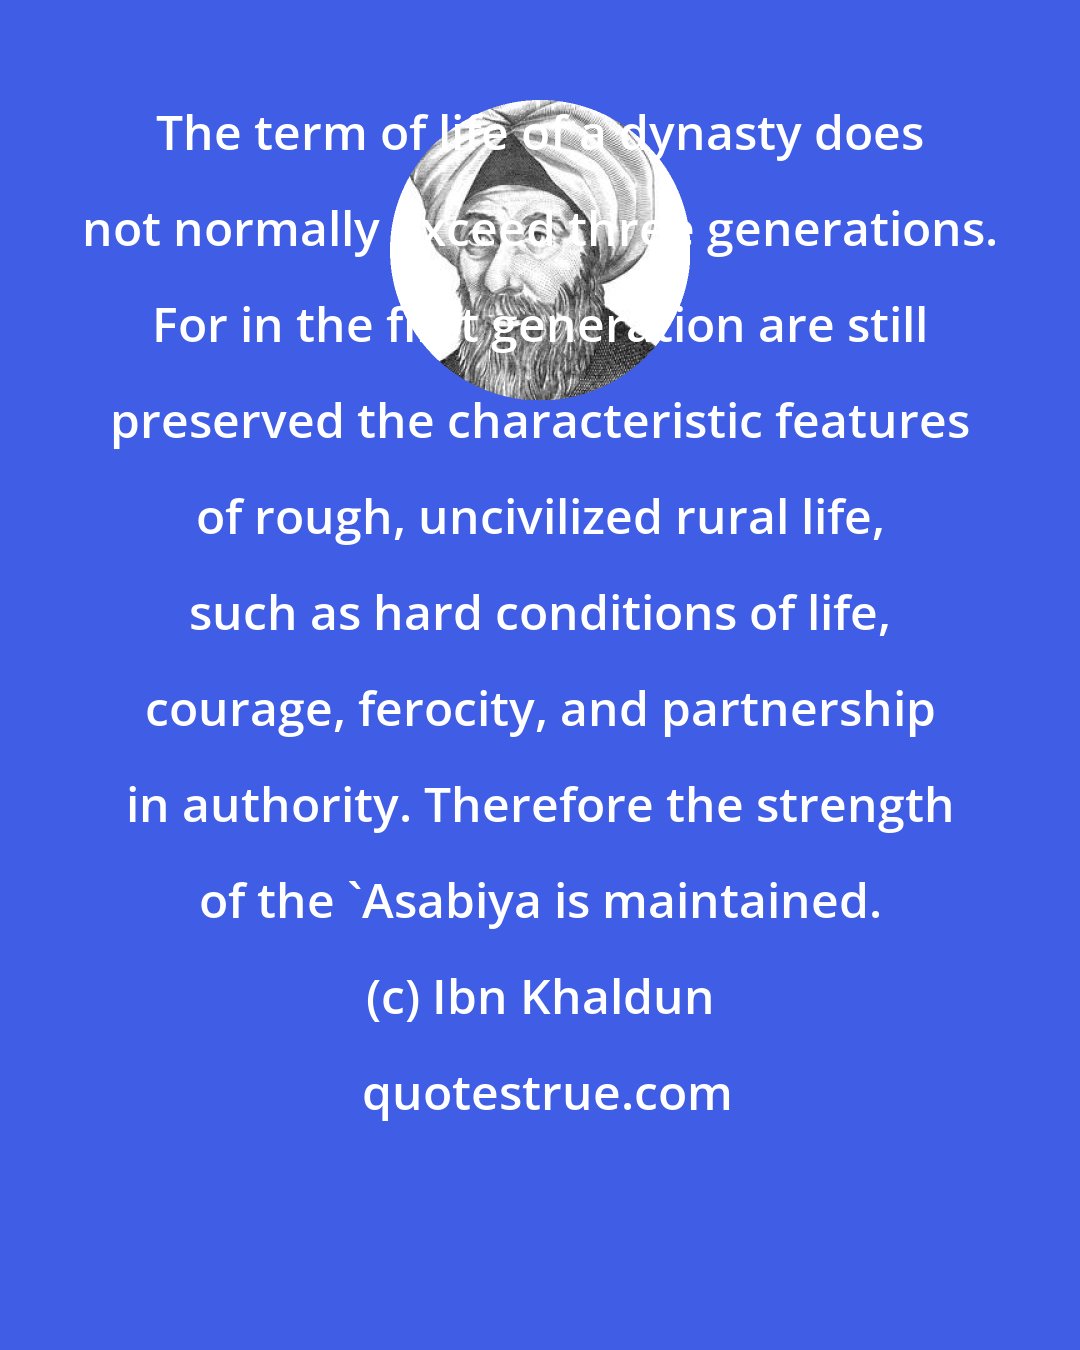 Ibn Khaldun: The term of life of a dynasty does not normally exceed three generations. For in the first generation are still preserved the characteristic features of rough, uncivilized rural life, such as hard conditions of life, courage, ferocity, and partnership in authority. Therefore the strength of the 'Asabiya is maintained.